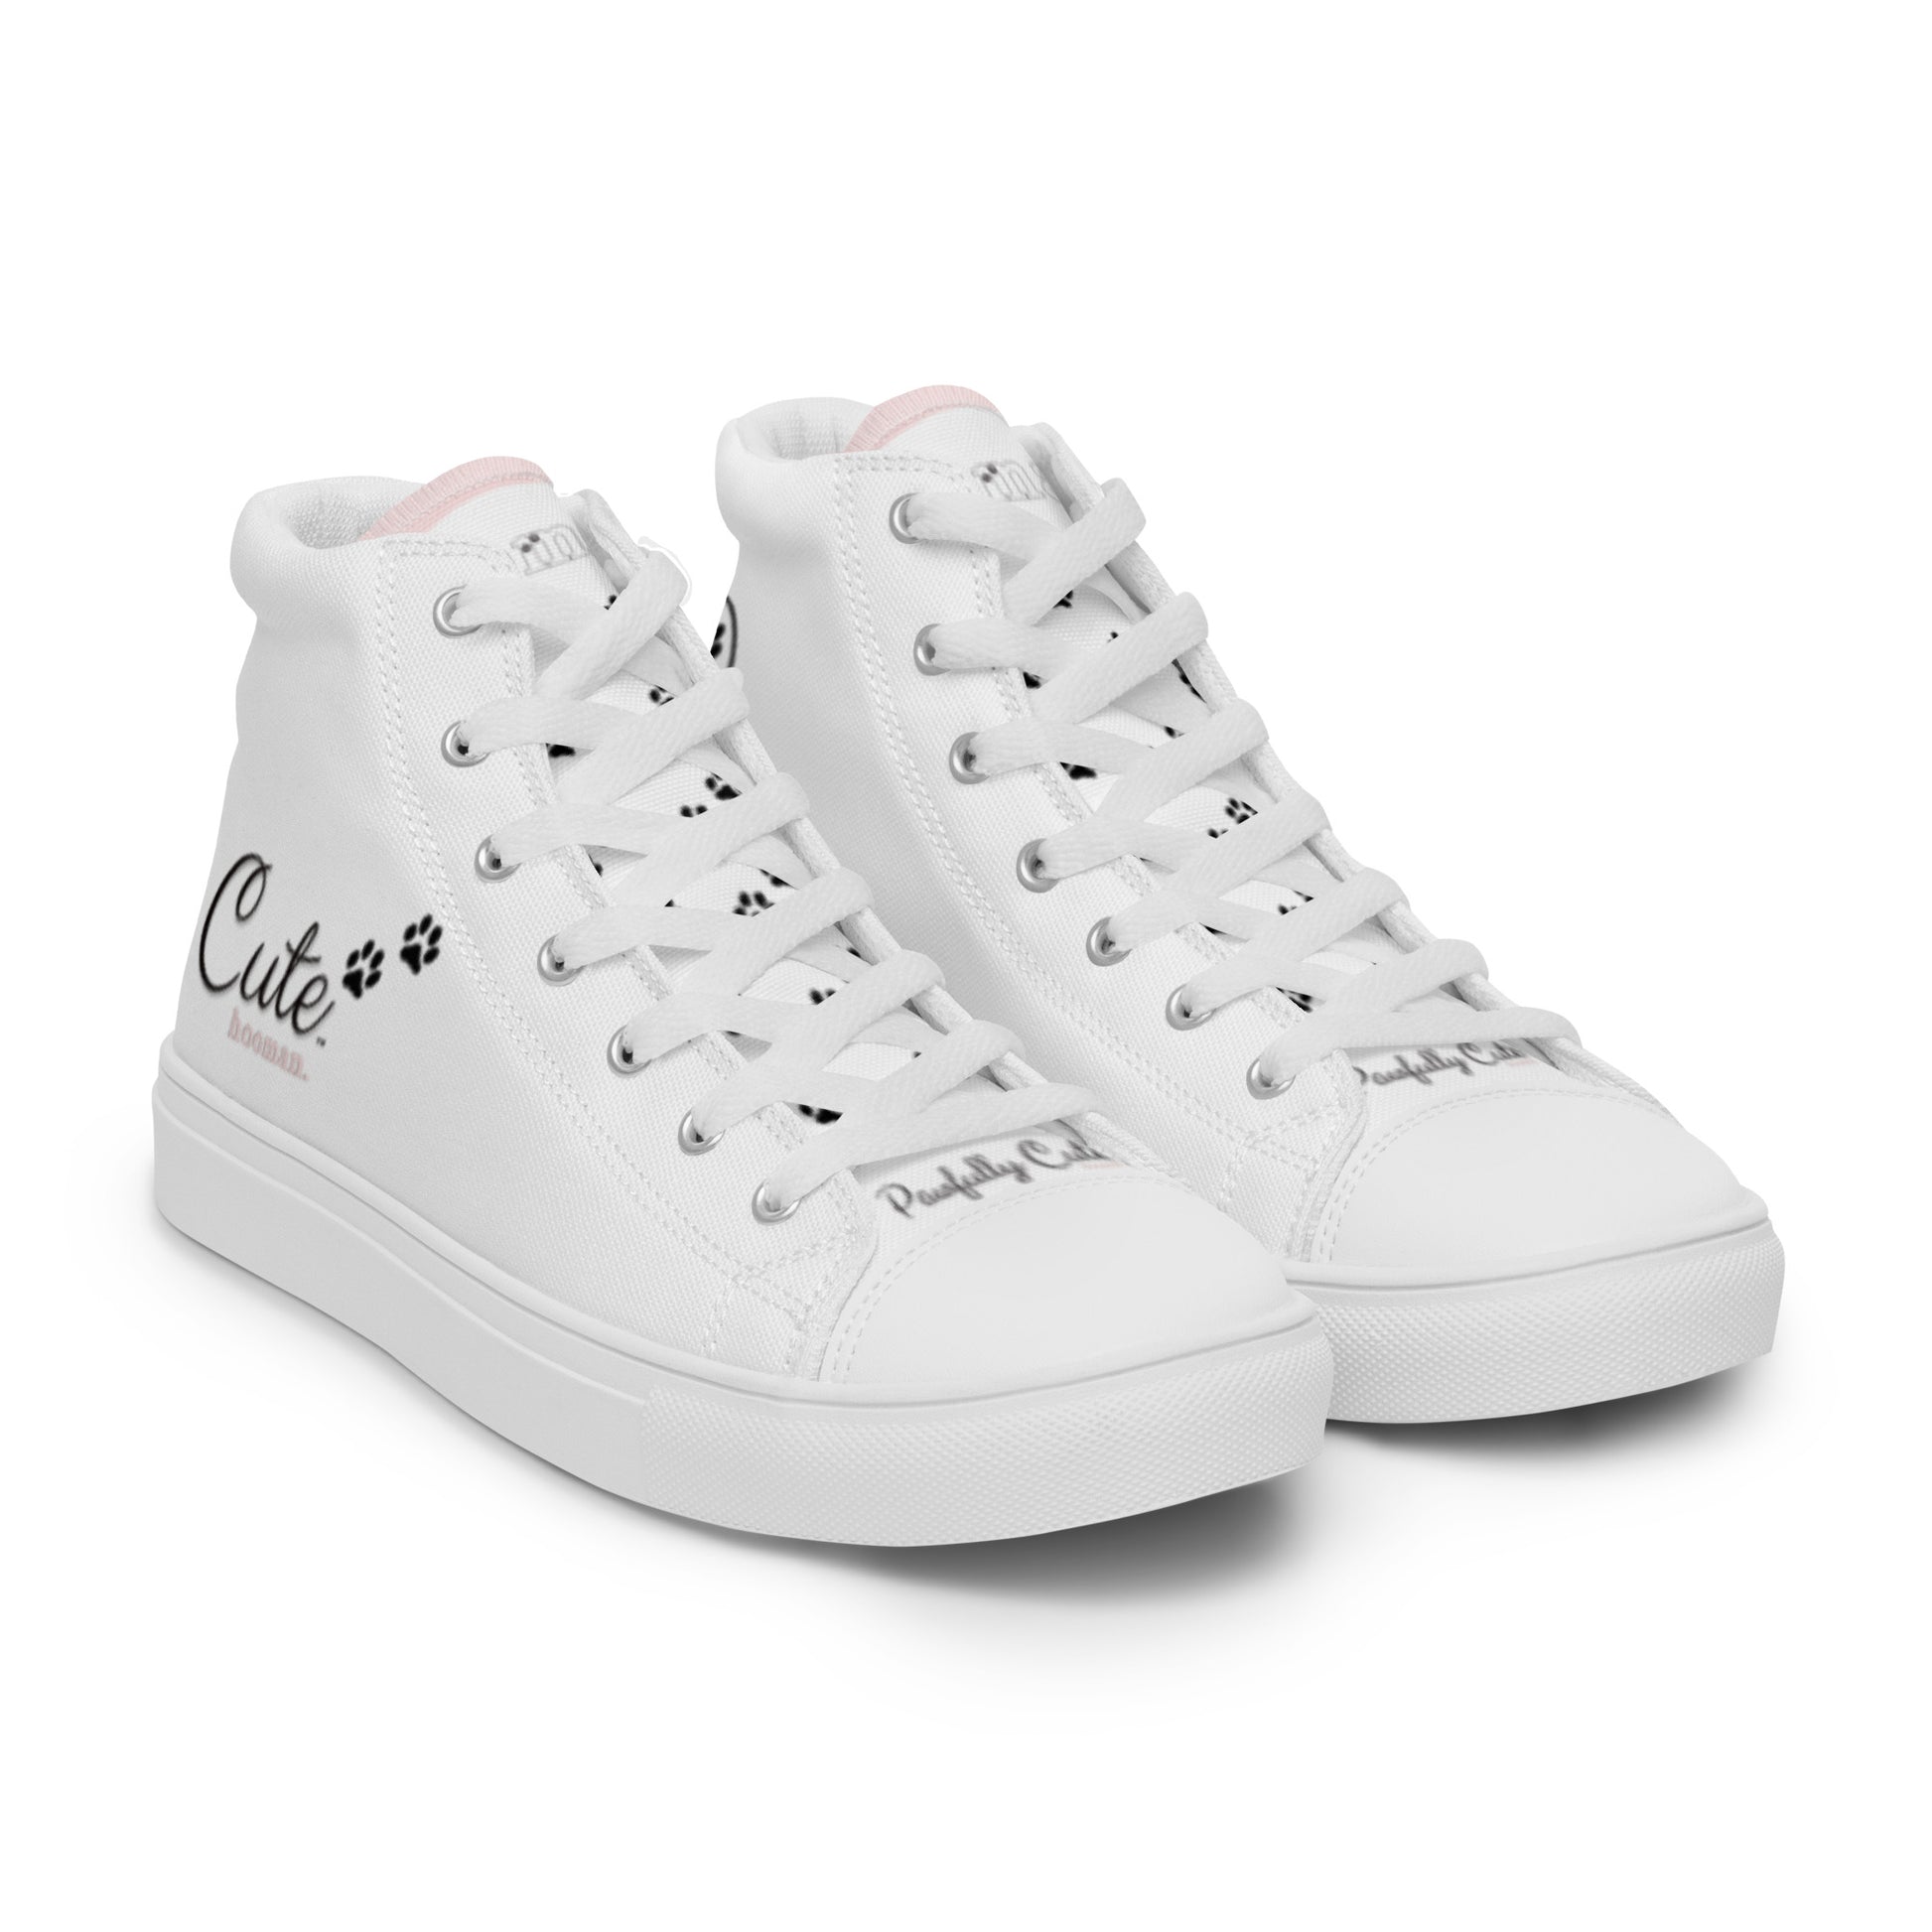 Pawfully Cute Hooman Signature High Tops! - Pawfully Cute!